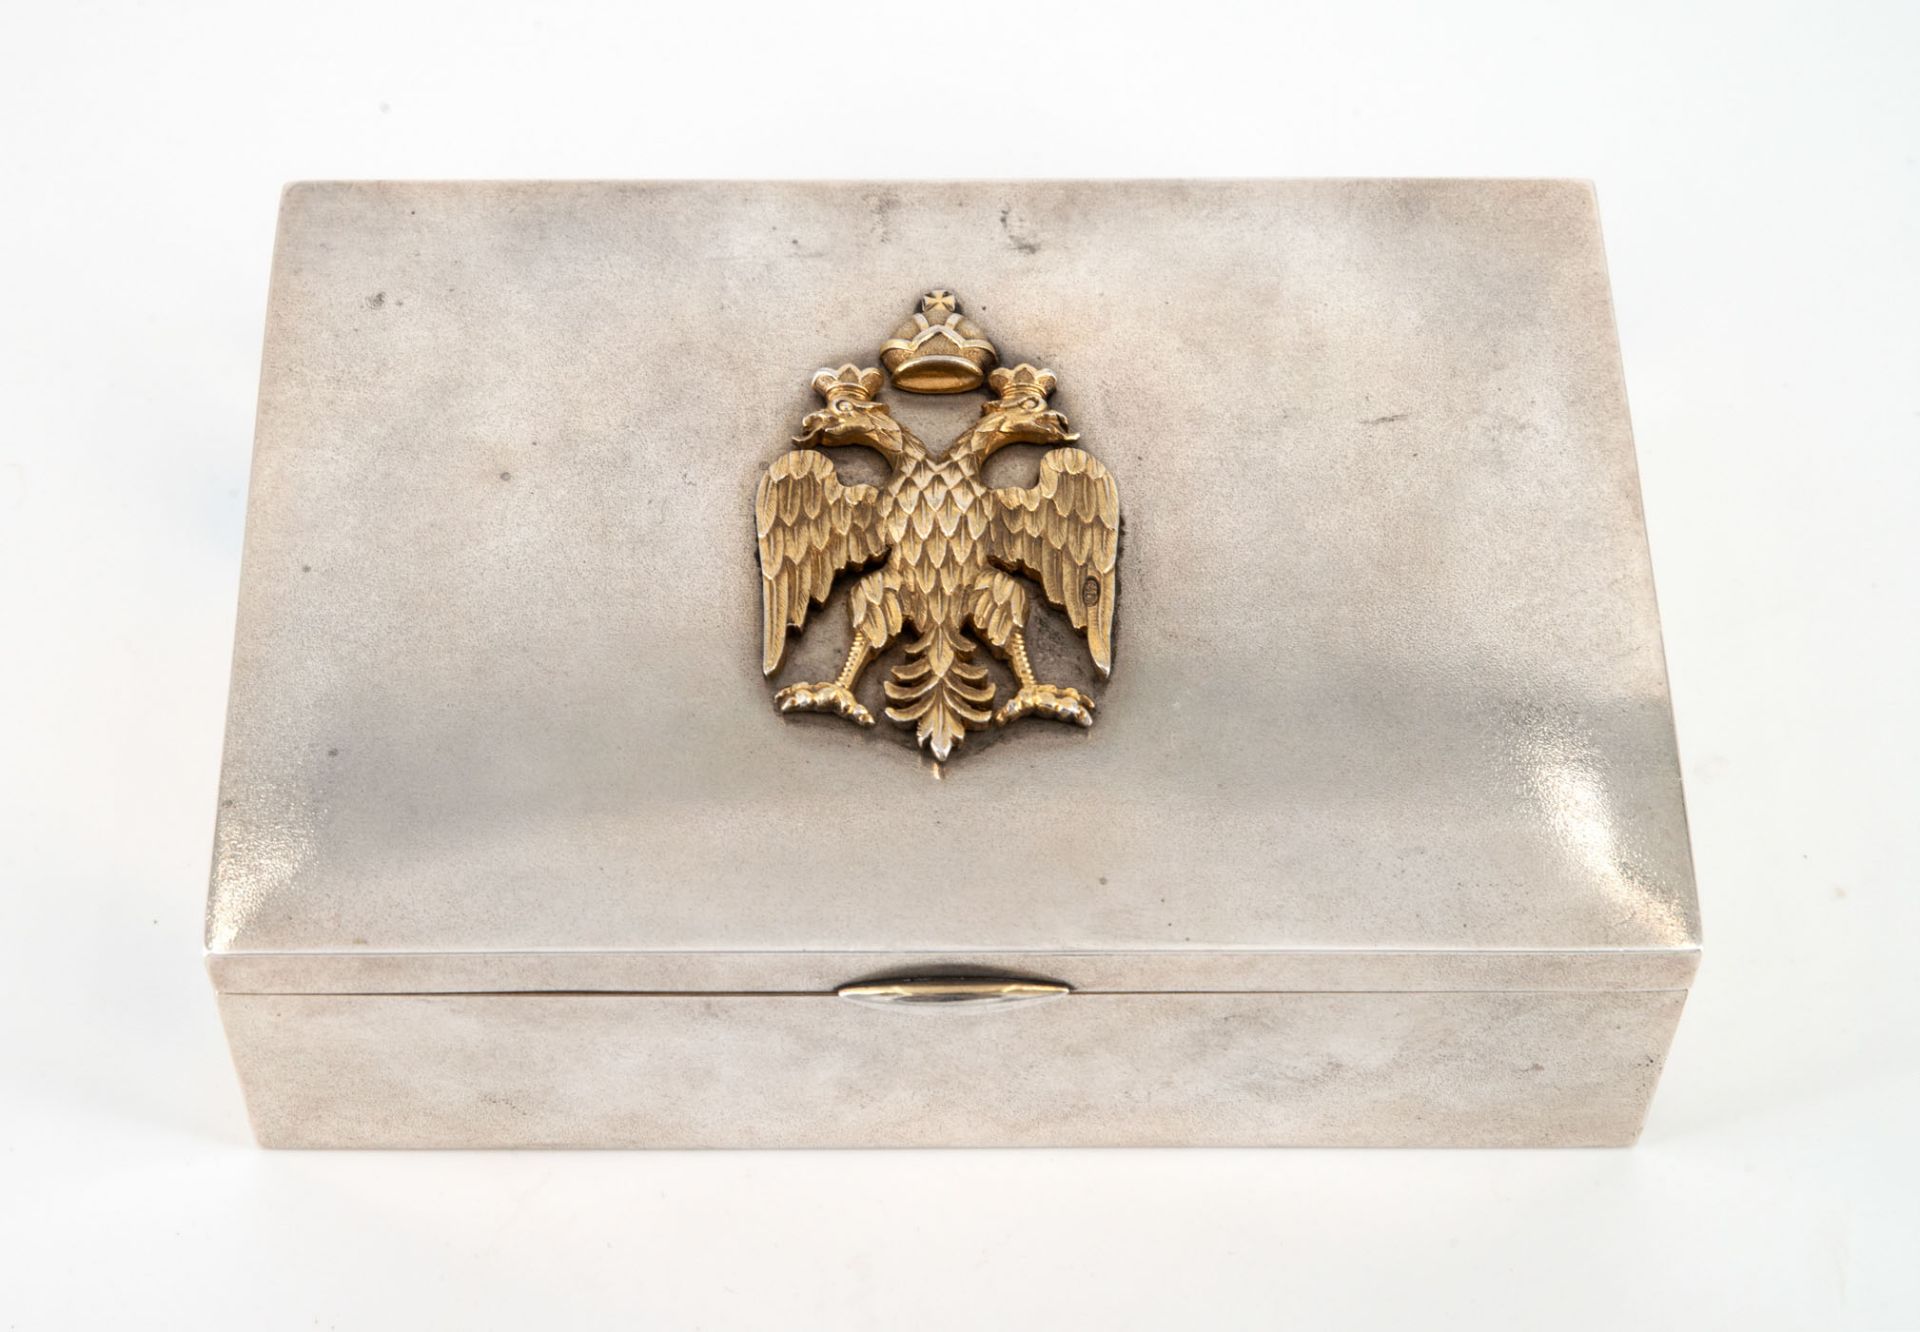 A Fine Silver and Parcel Gilt Jewelry Box, Russia, Moscow, 1896-1908 - Image 4 of 5